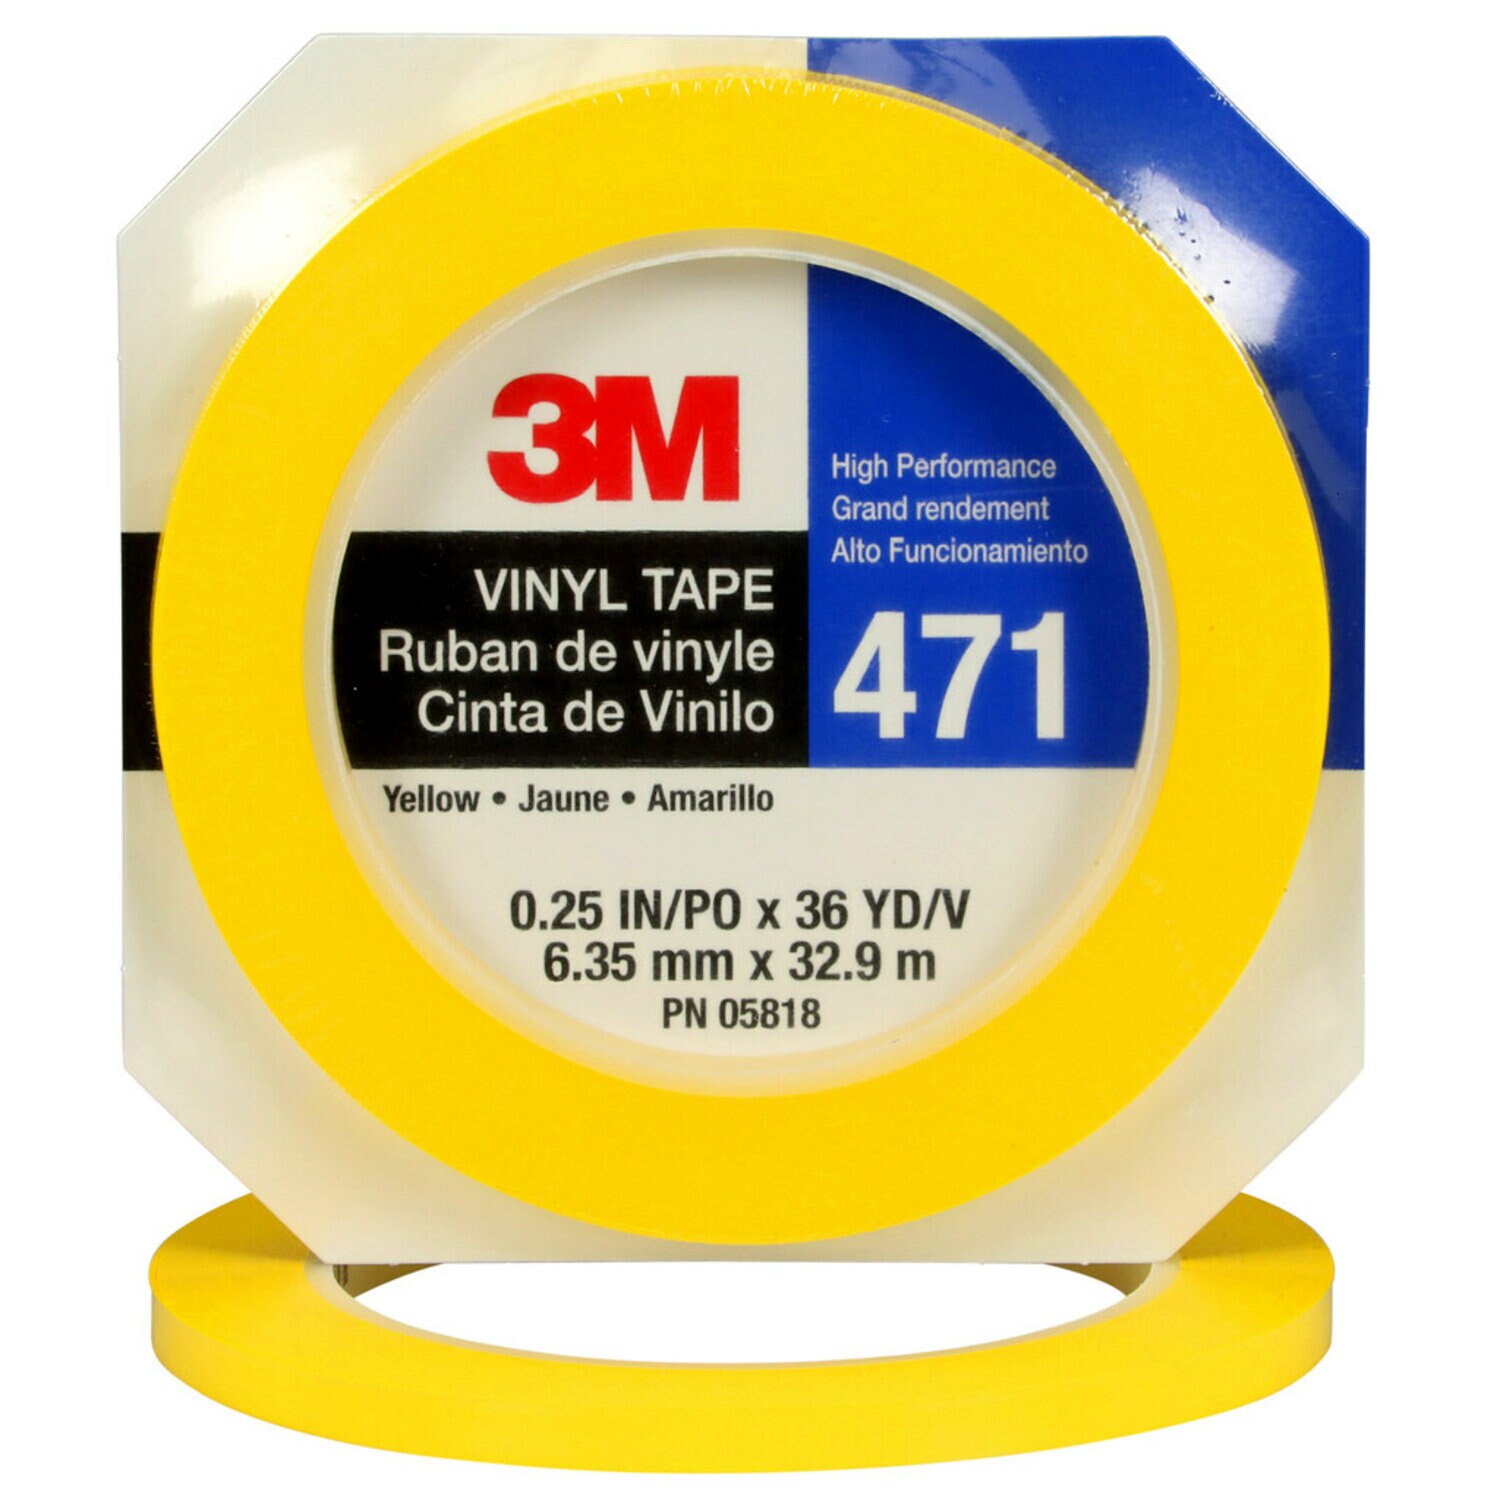 7100044645 - 3M Vinyl Tape 471, Yellow, 1/4 in x 36 yd, 5.2 mil, 144 rolls per case,
Individually Wrapped Conveniently Packaged